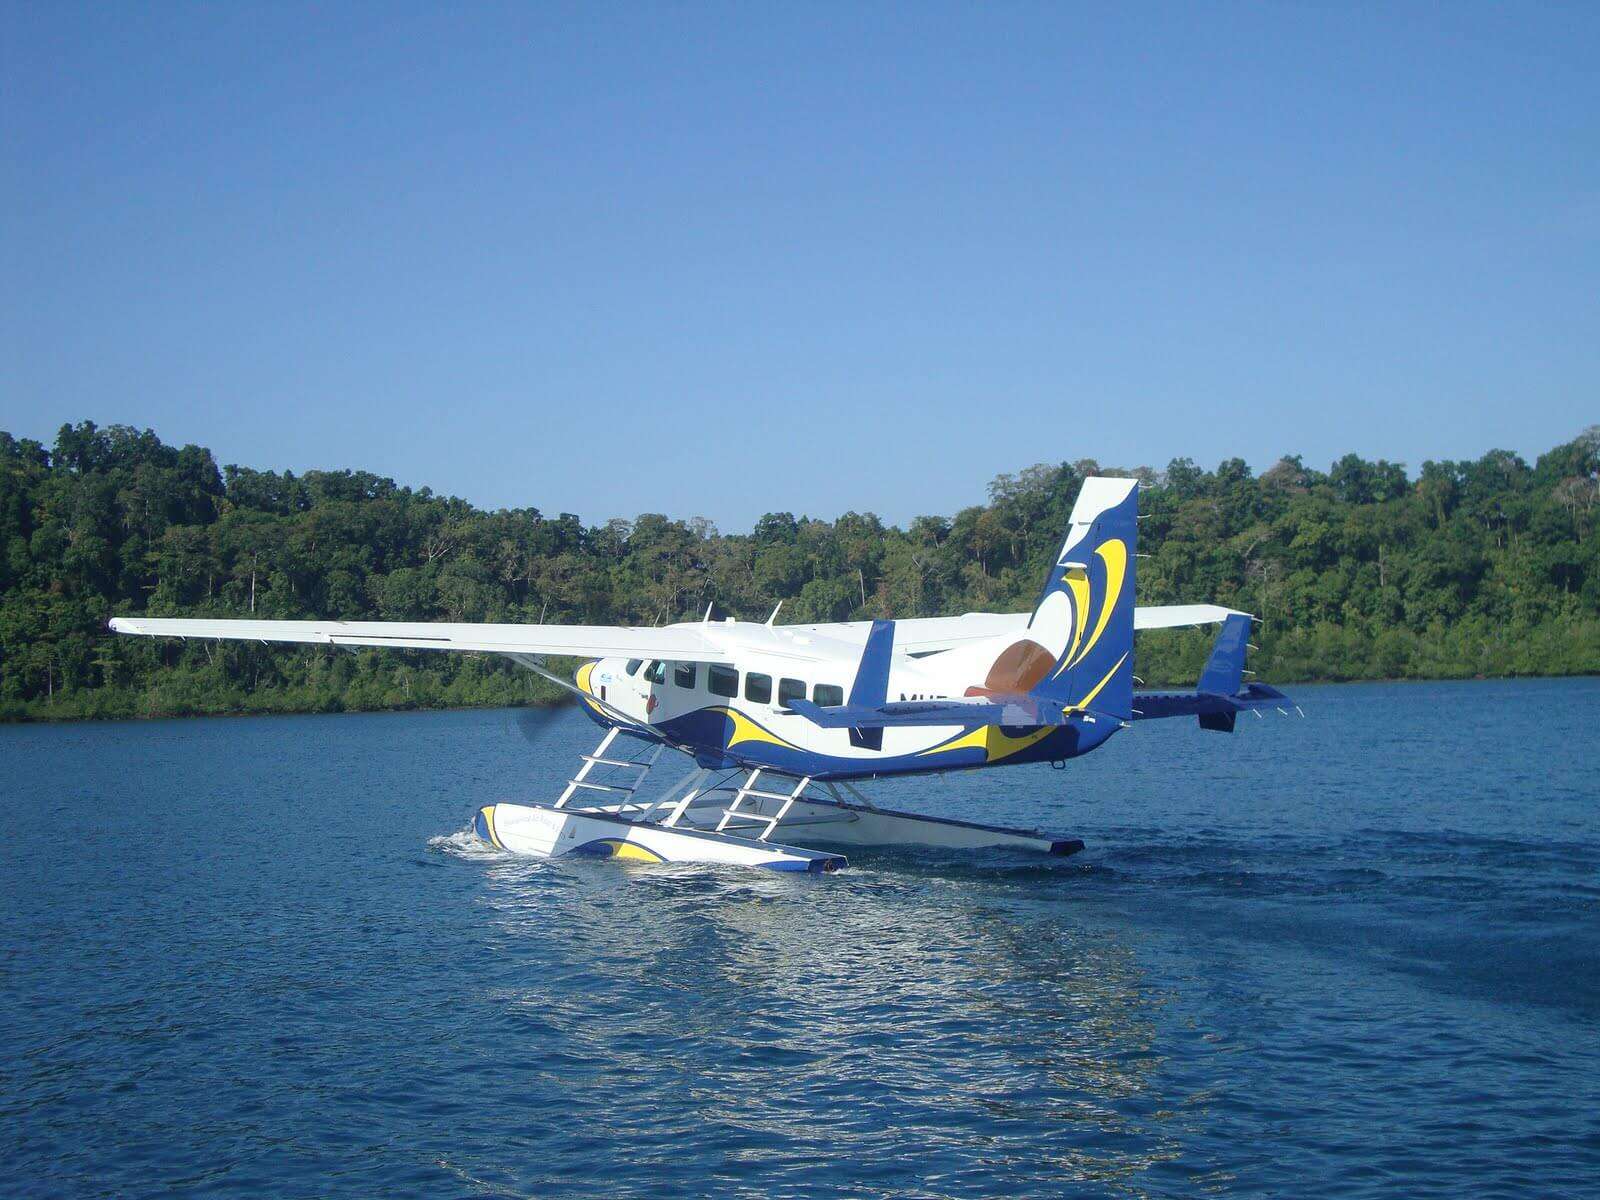 The sea plane run by Jal Hans in Andaman